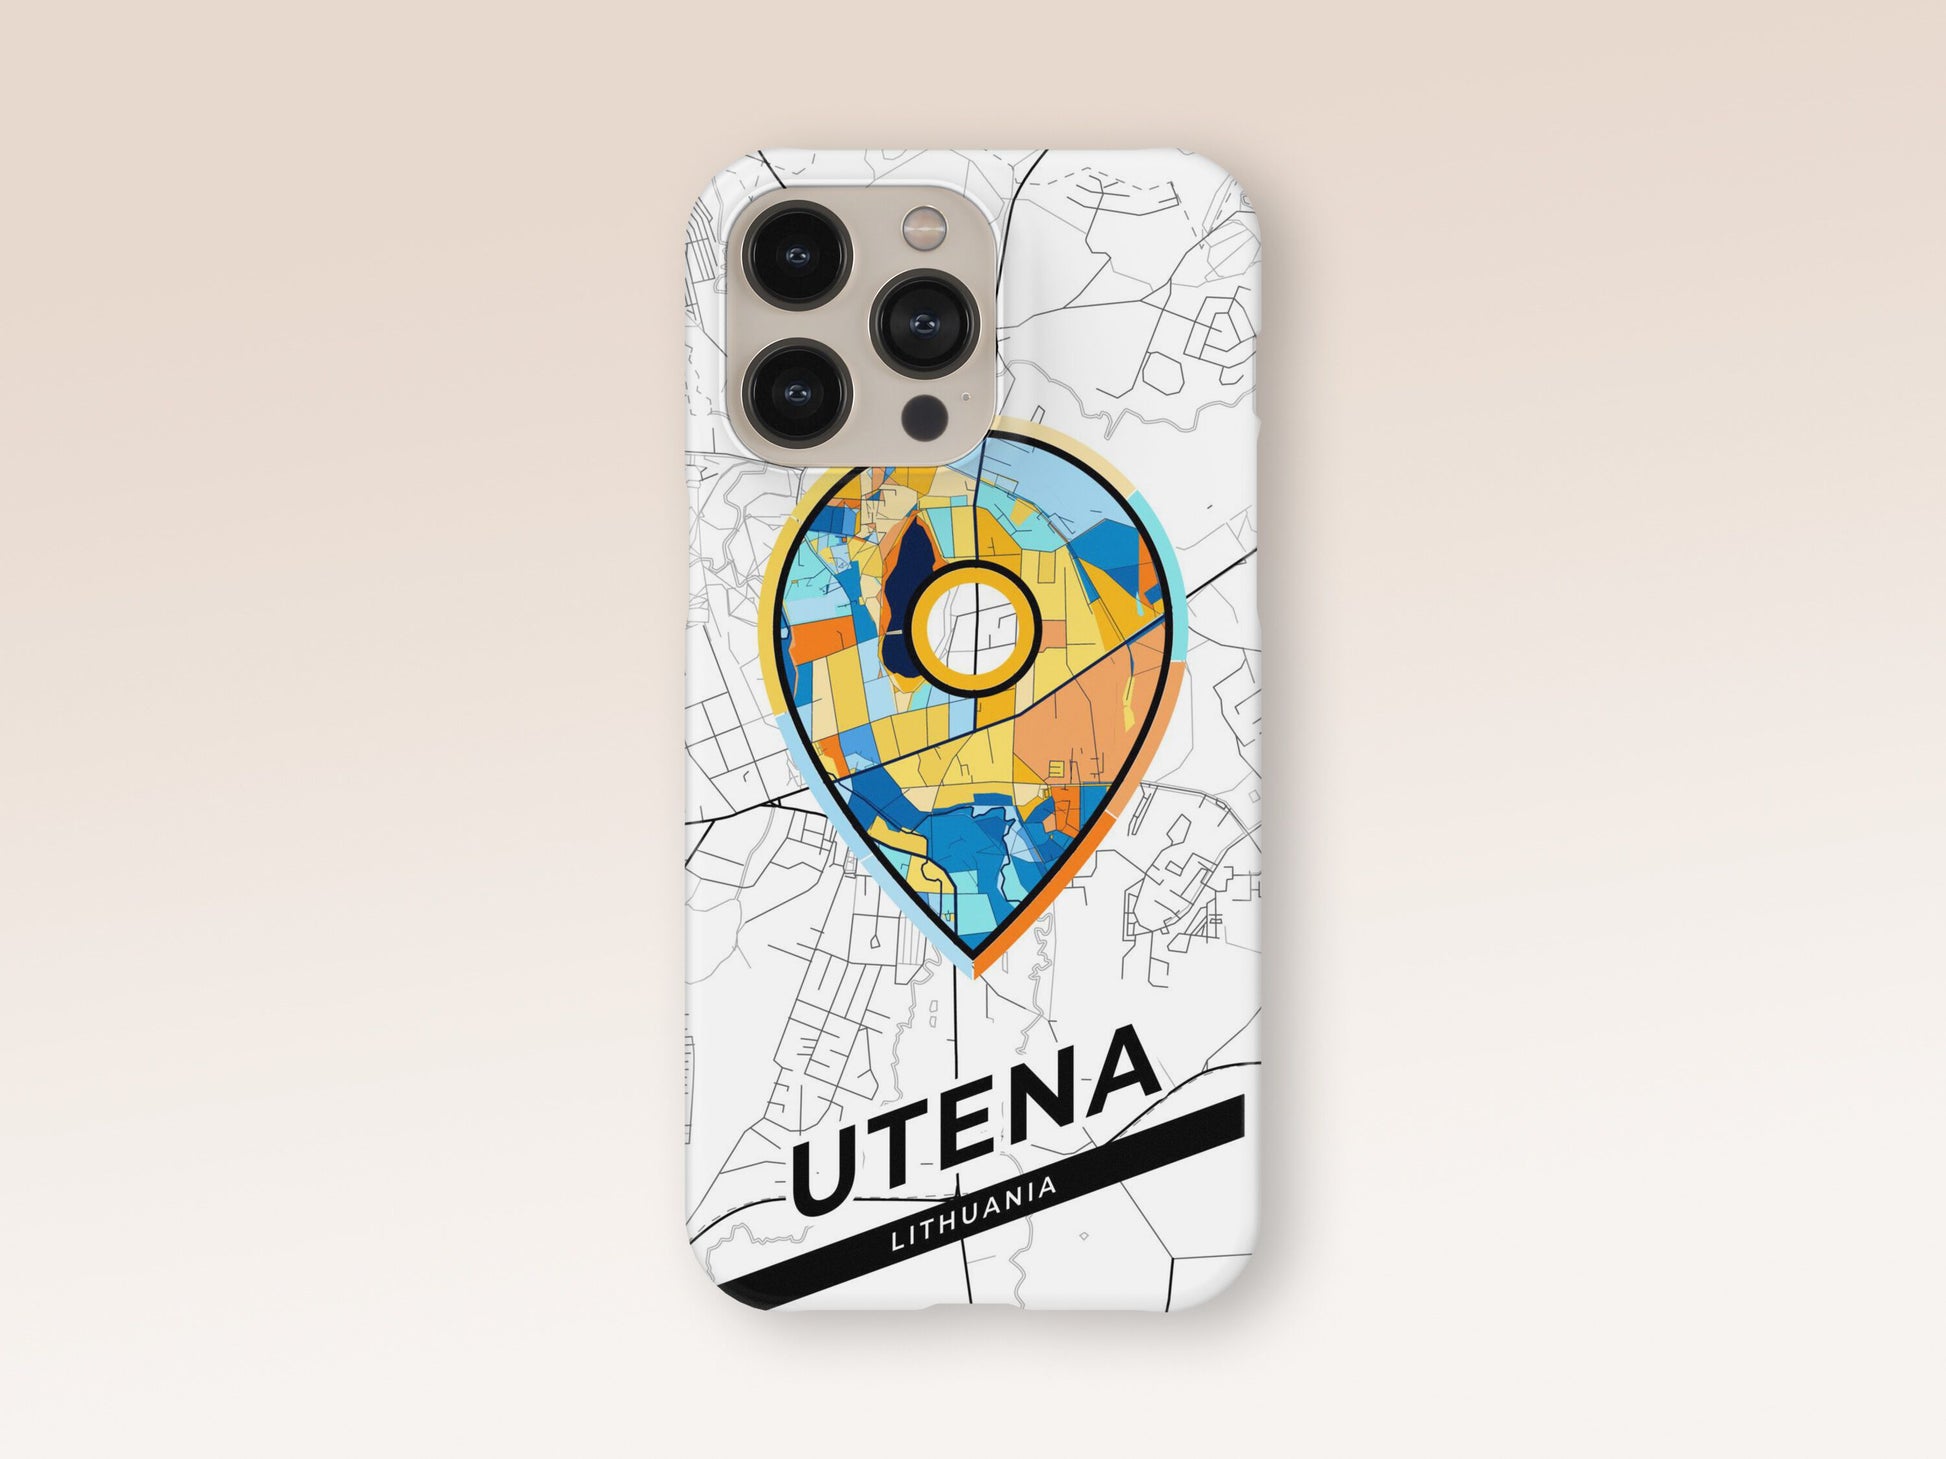 Utena Lithuania slim phone case with colorful icon 1